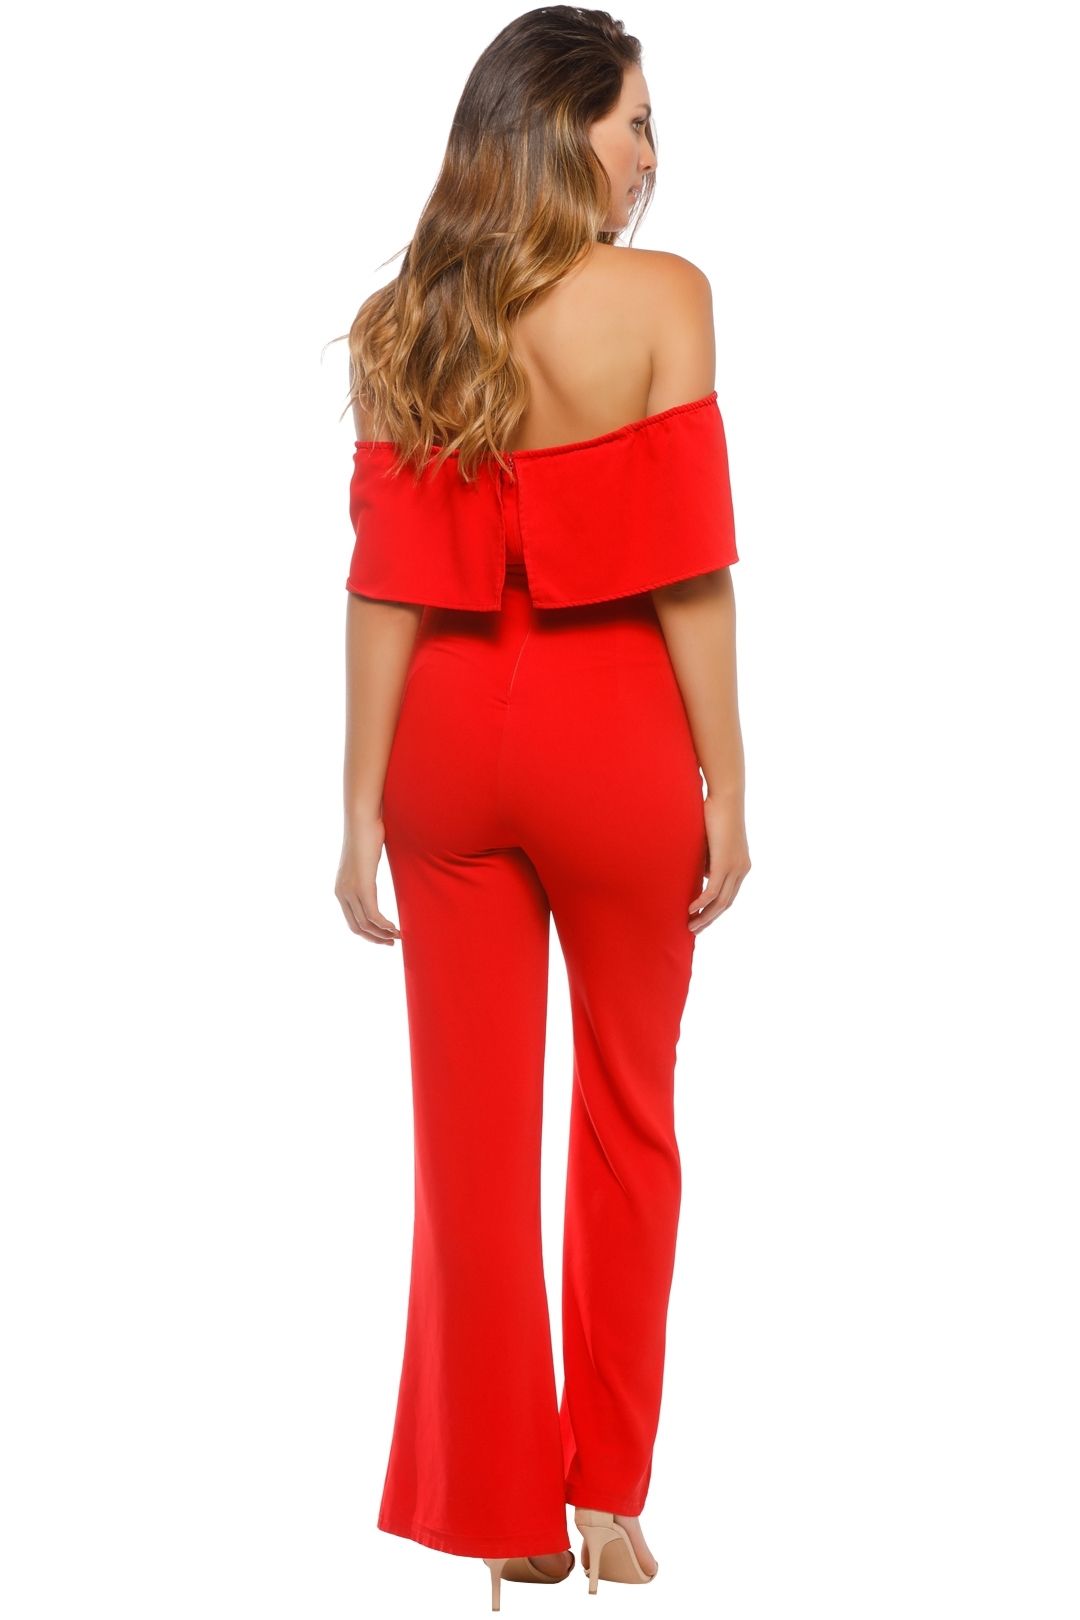 Mossman - The Blank Stare Jumpsuit - Red - Back 